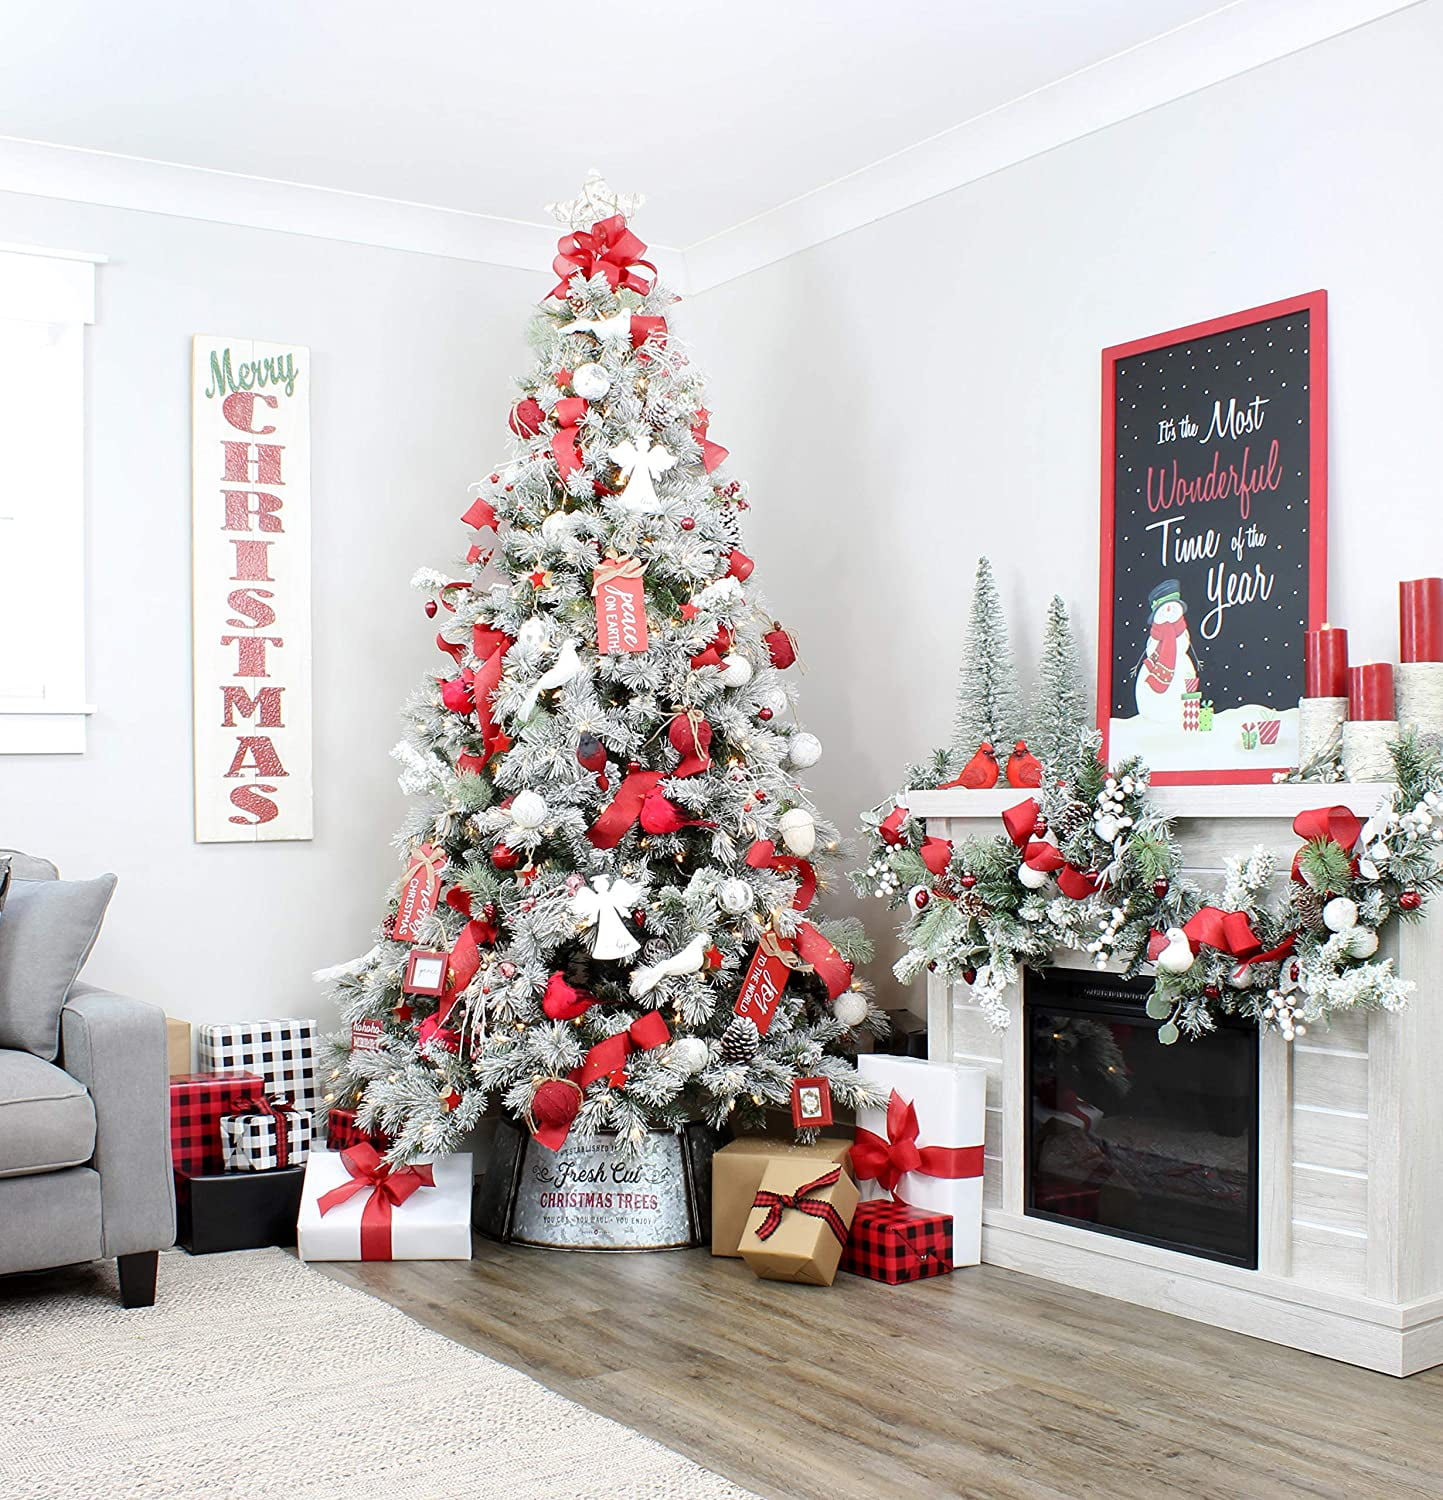 Holiday Decorating With Cranberries | Midwest Living